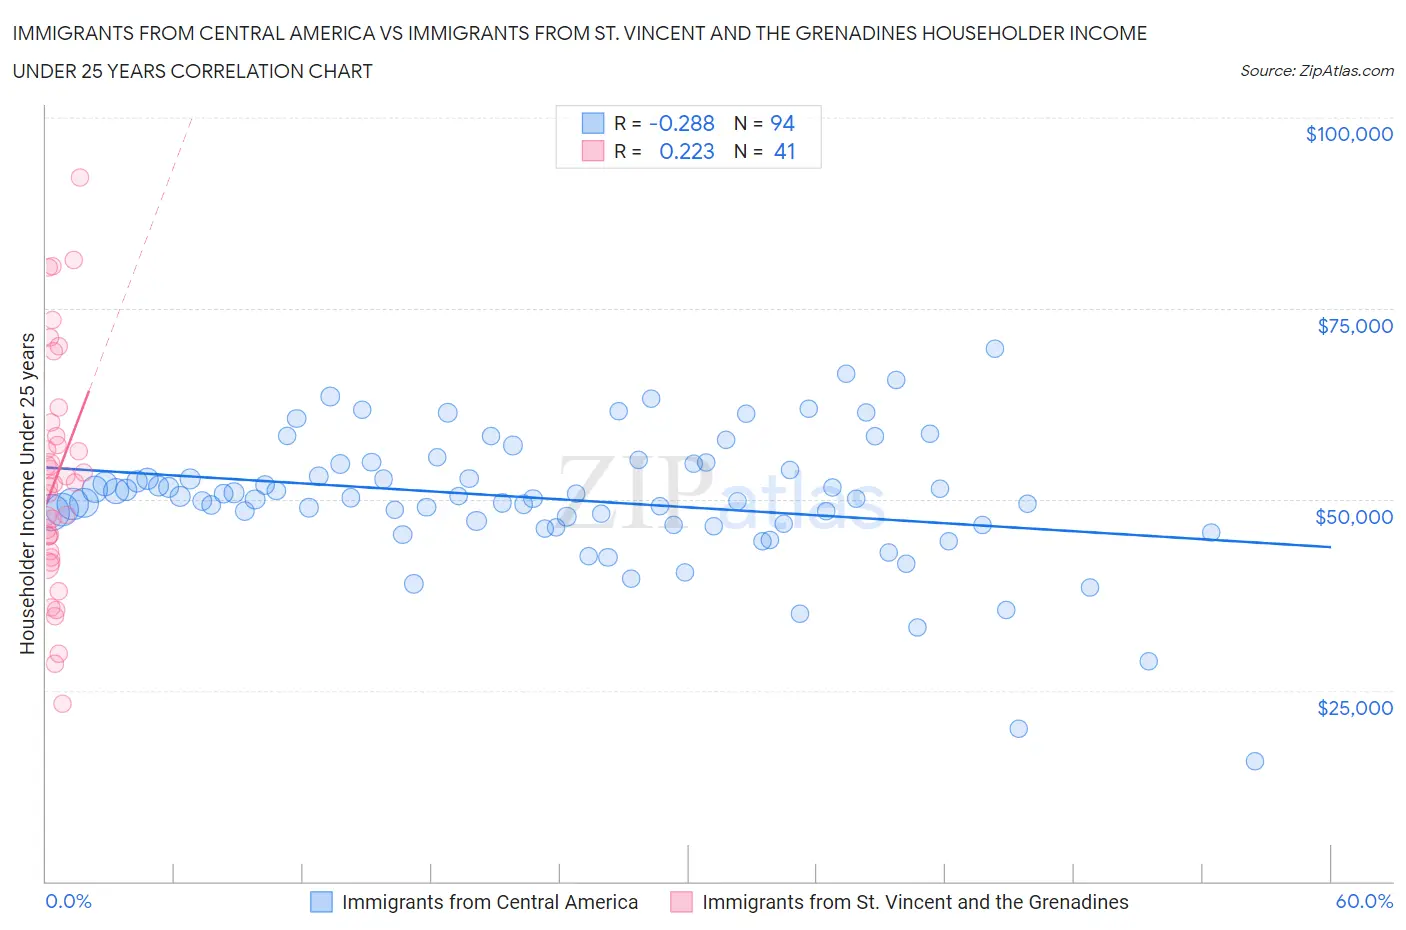 Immigrants from Central America vs Immigrants from St. Vincent and the Grenadines Householder Income Under 25 years